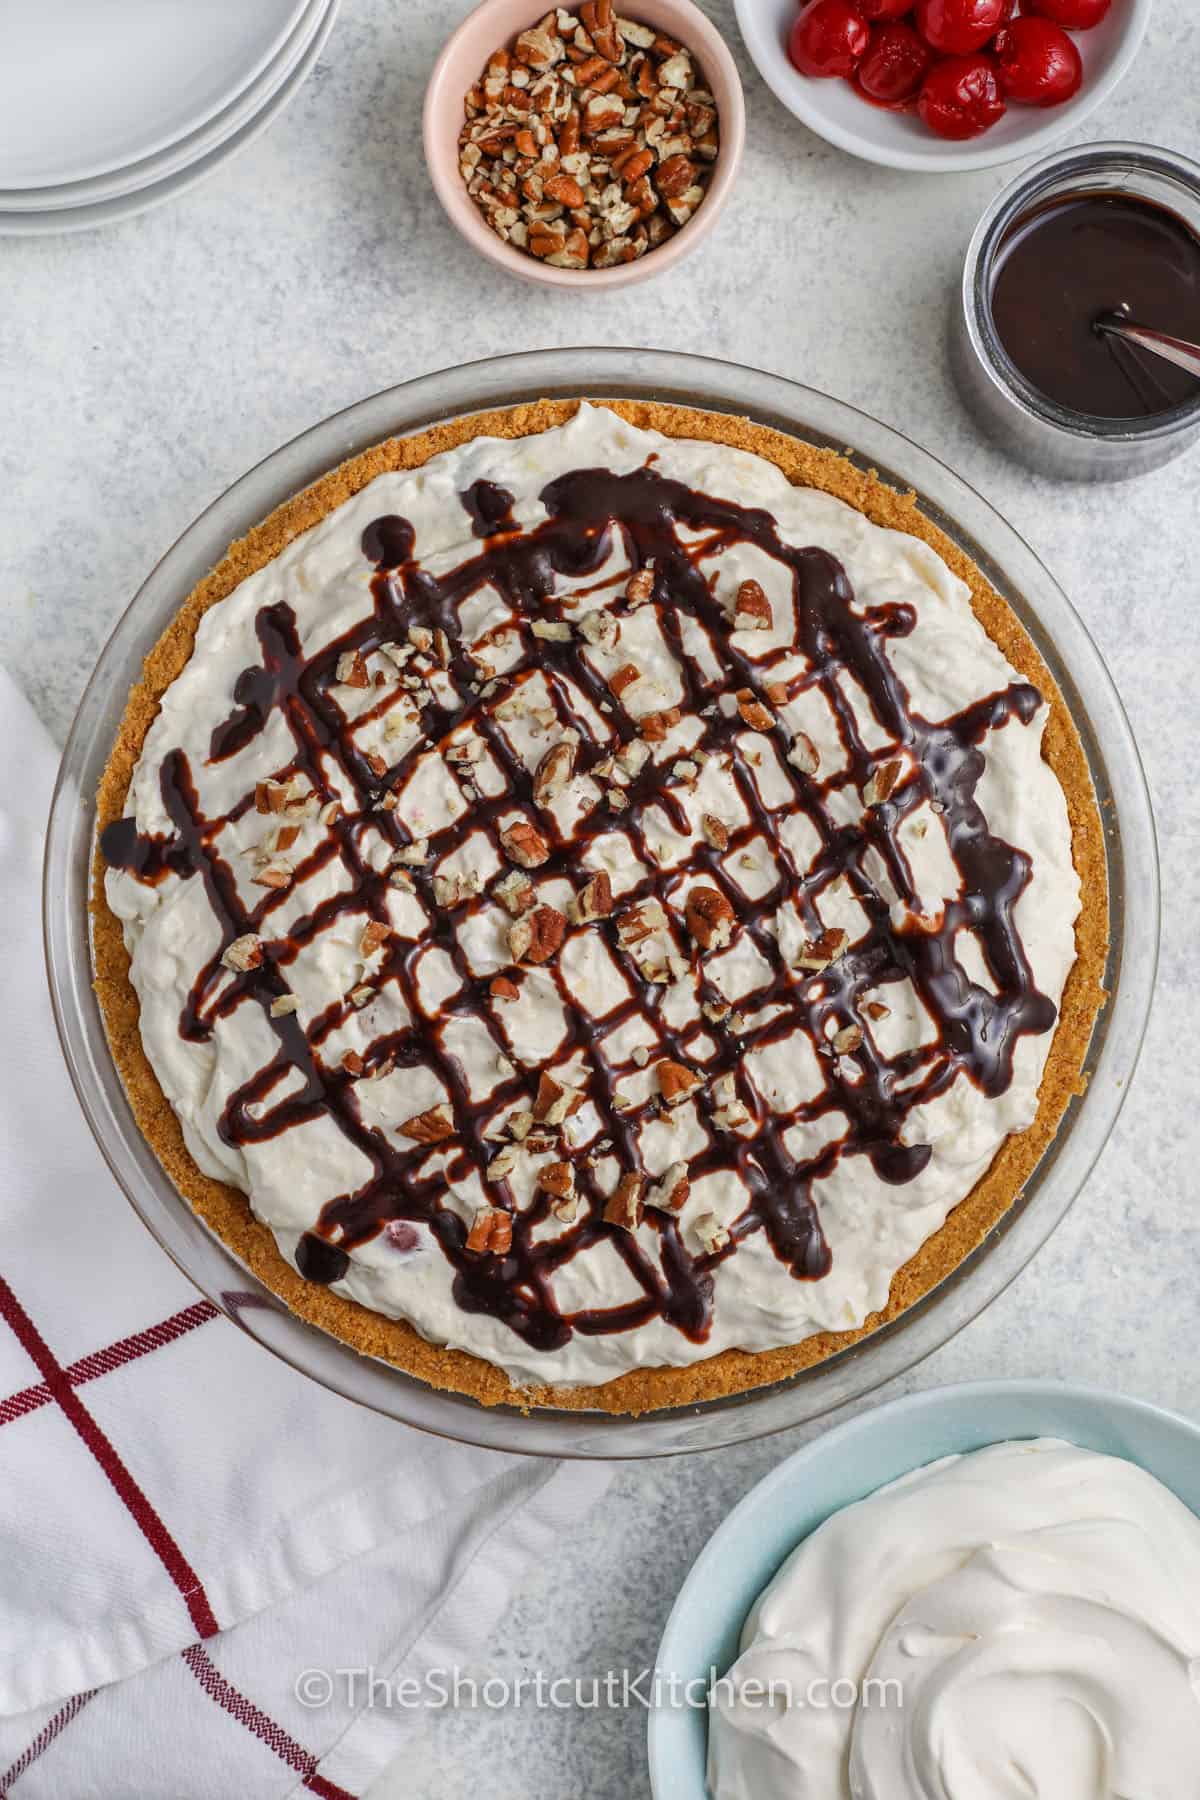 Banana Split Pie with nuts and chocolate syrup on top